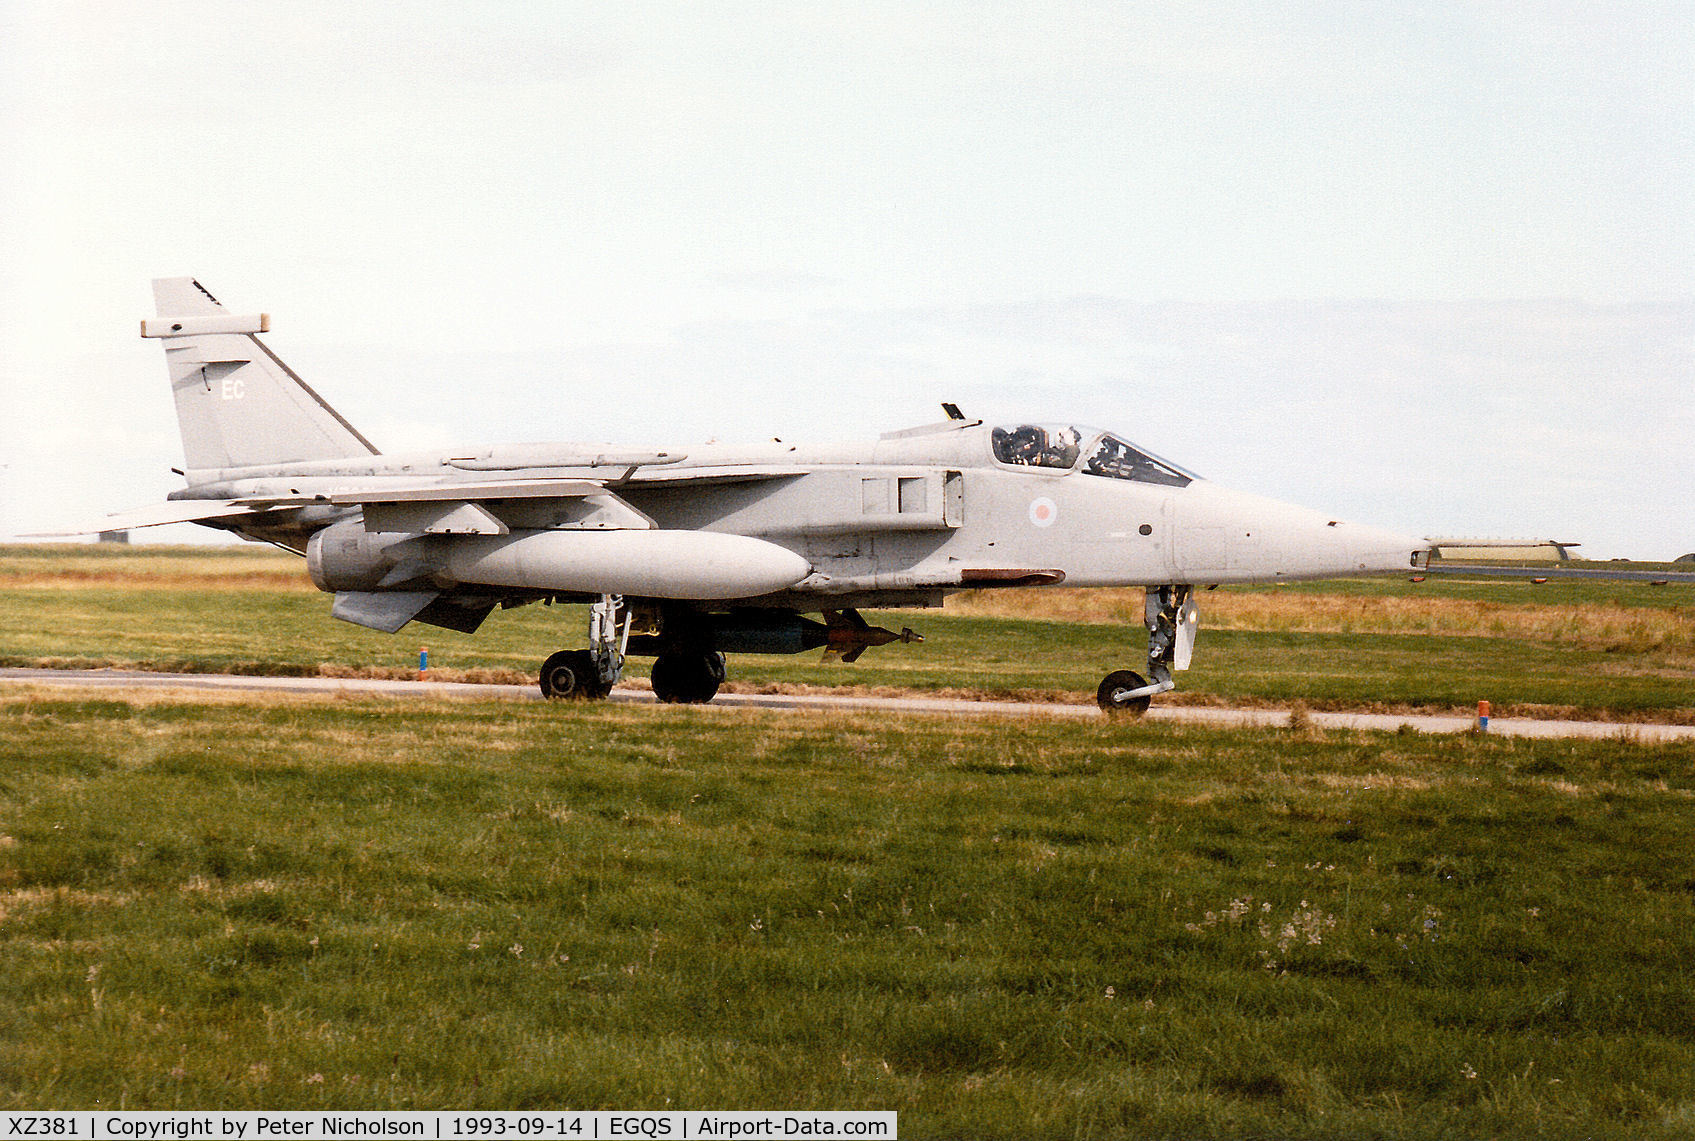 XZ381, 1977 Sepecat Jaguar GR.1A C/N S.146, Jaguar GR.1A of 6 Squadron at RAF Coltishall taxying to Runway 05 at RAF Lossiemouth in September 1993.